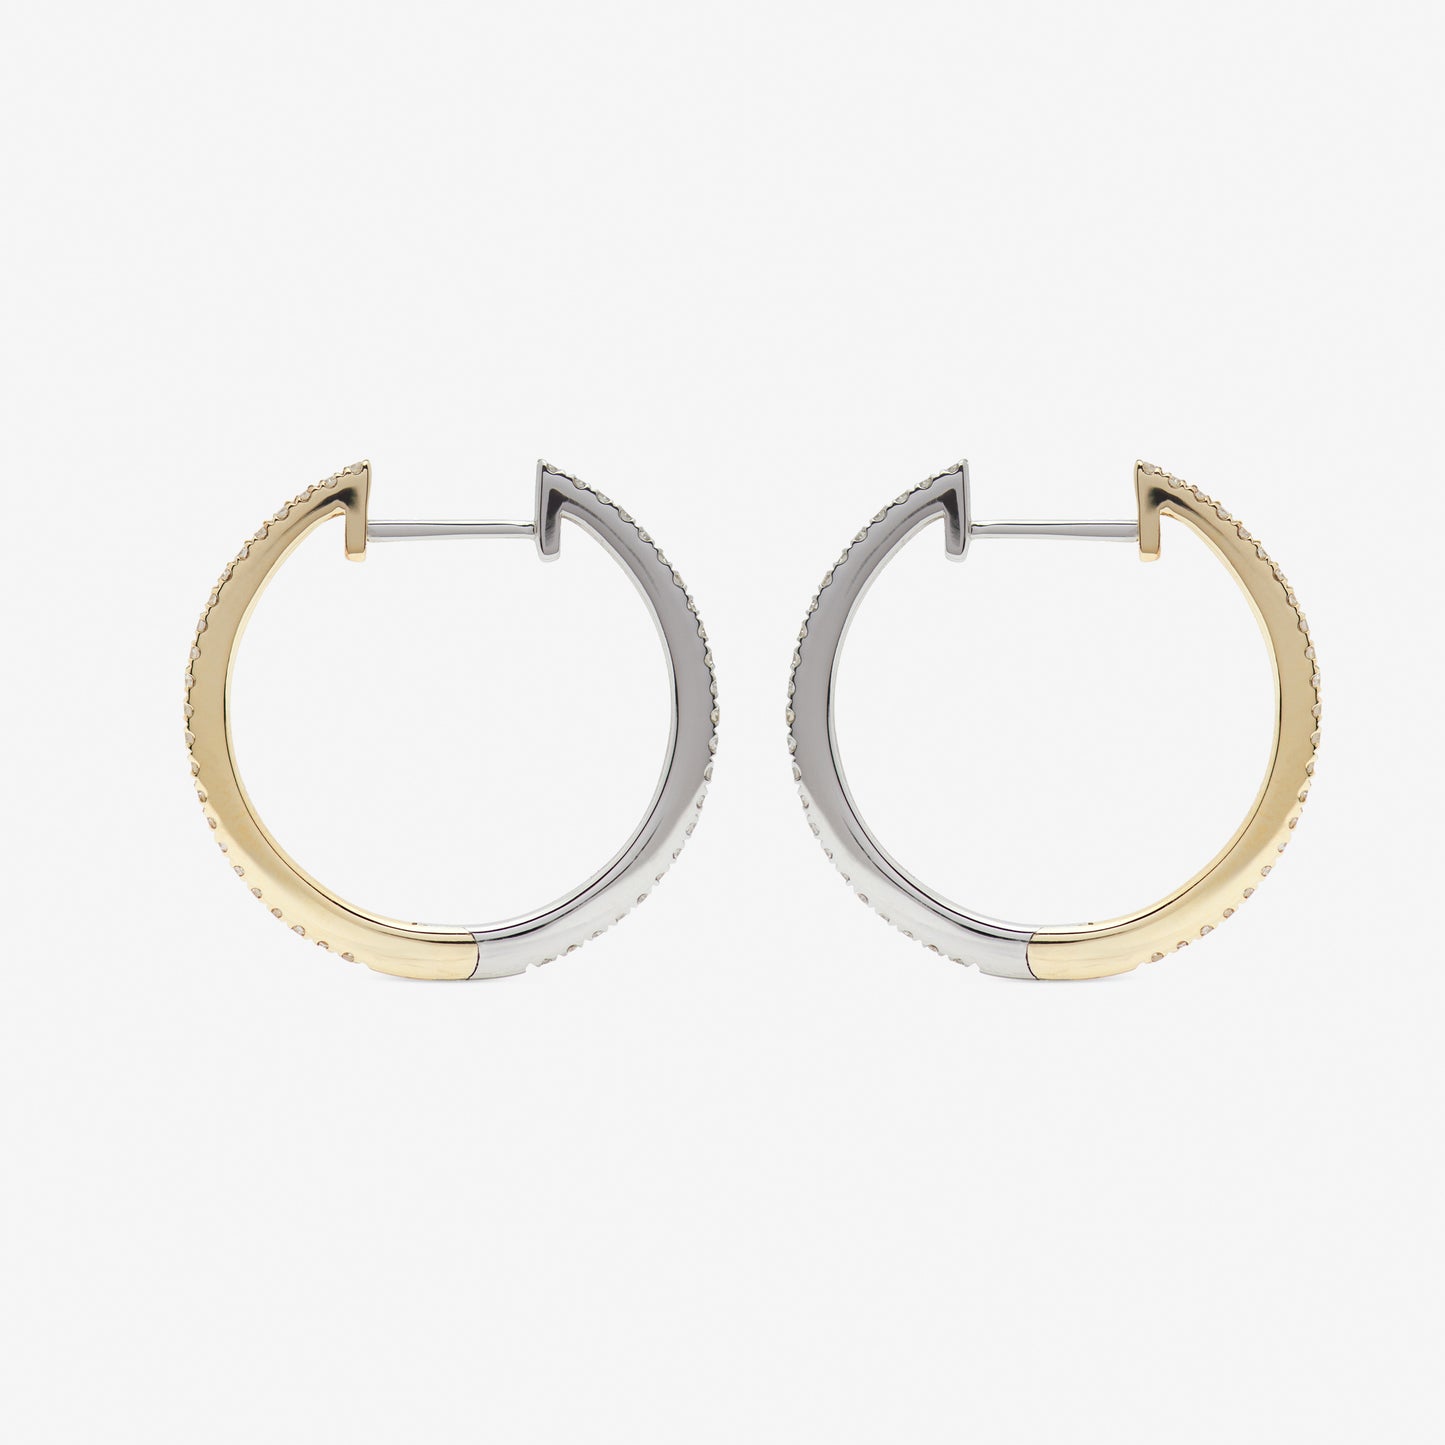 20mm hoop pair in white and yellow gold from side